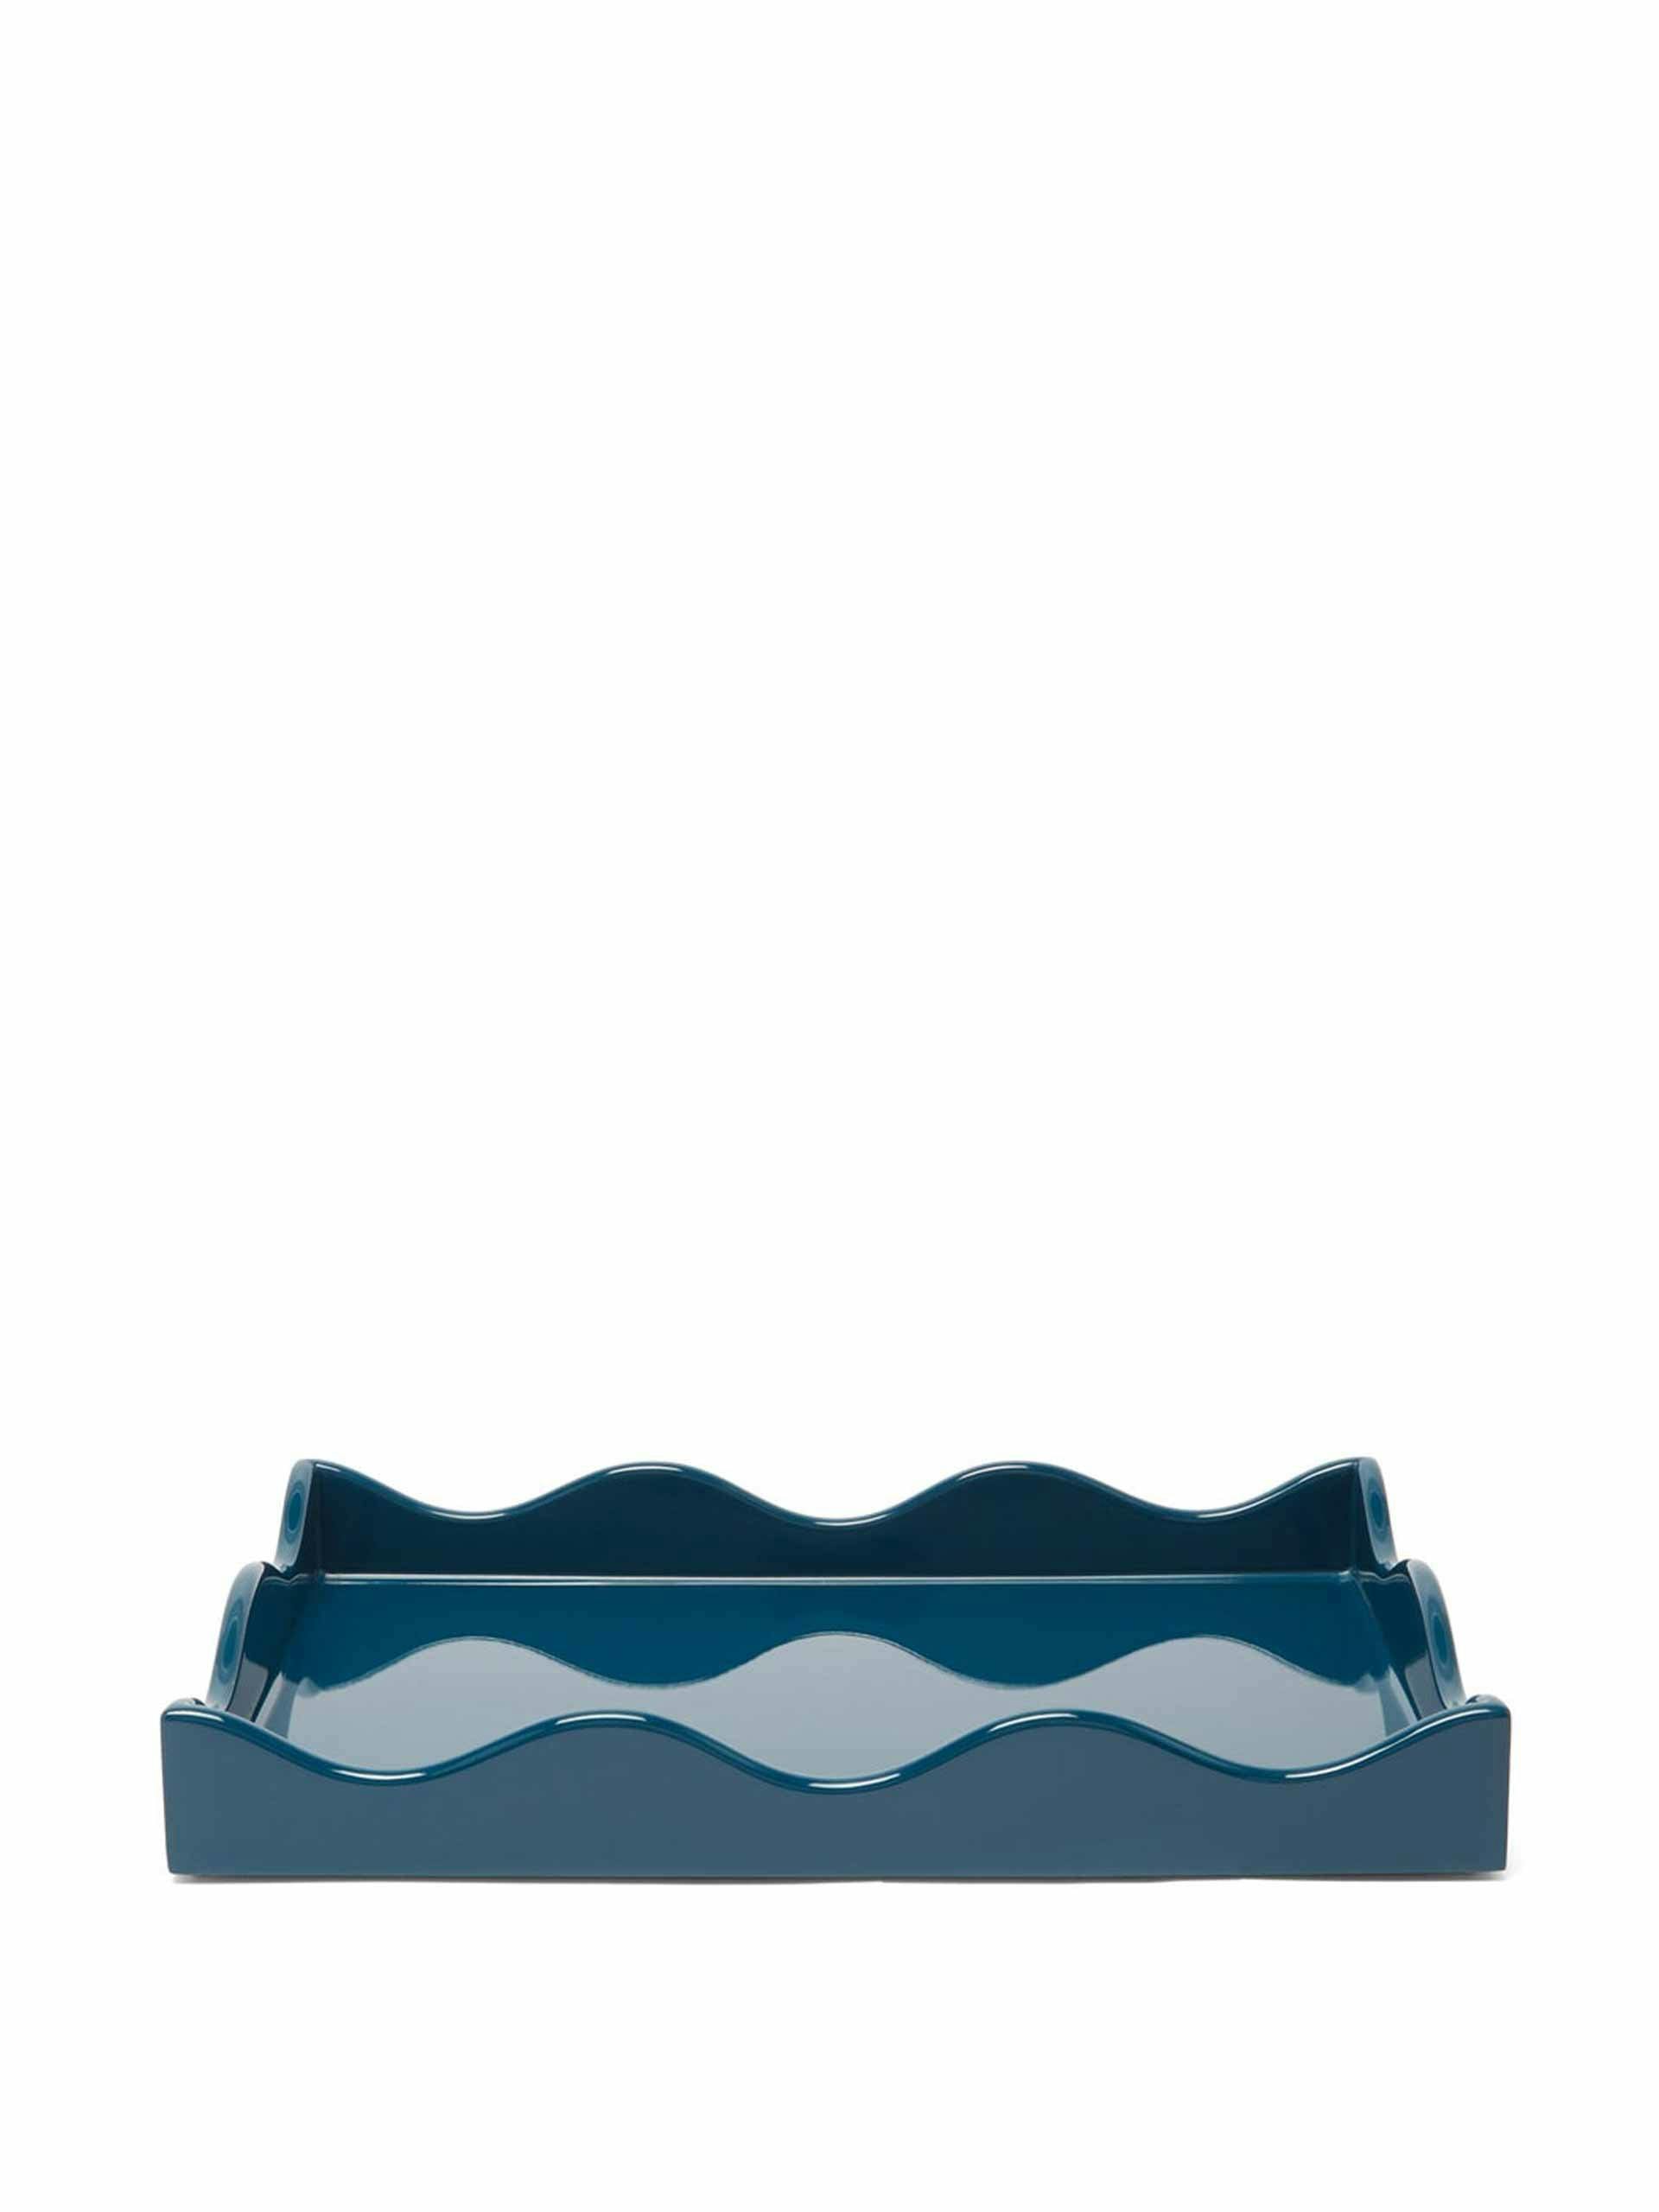 Scalloped lacquered tray